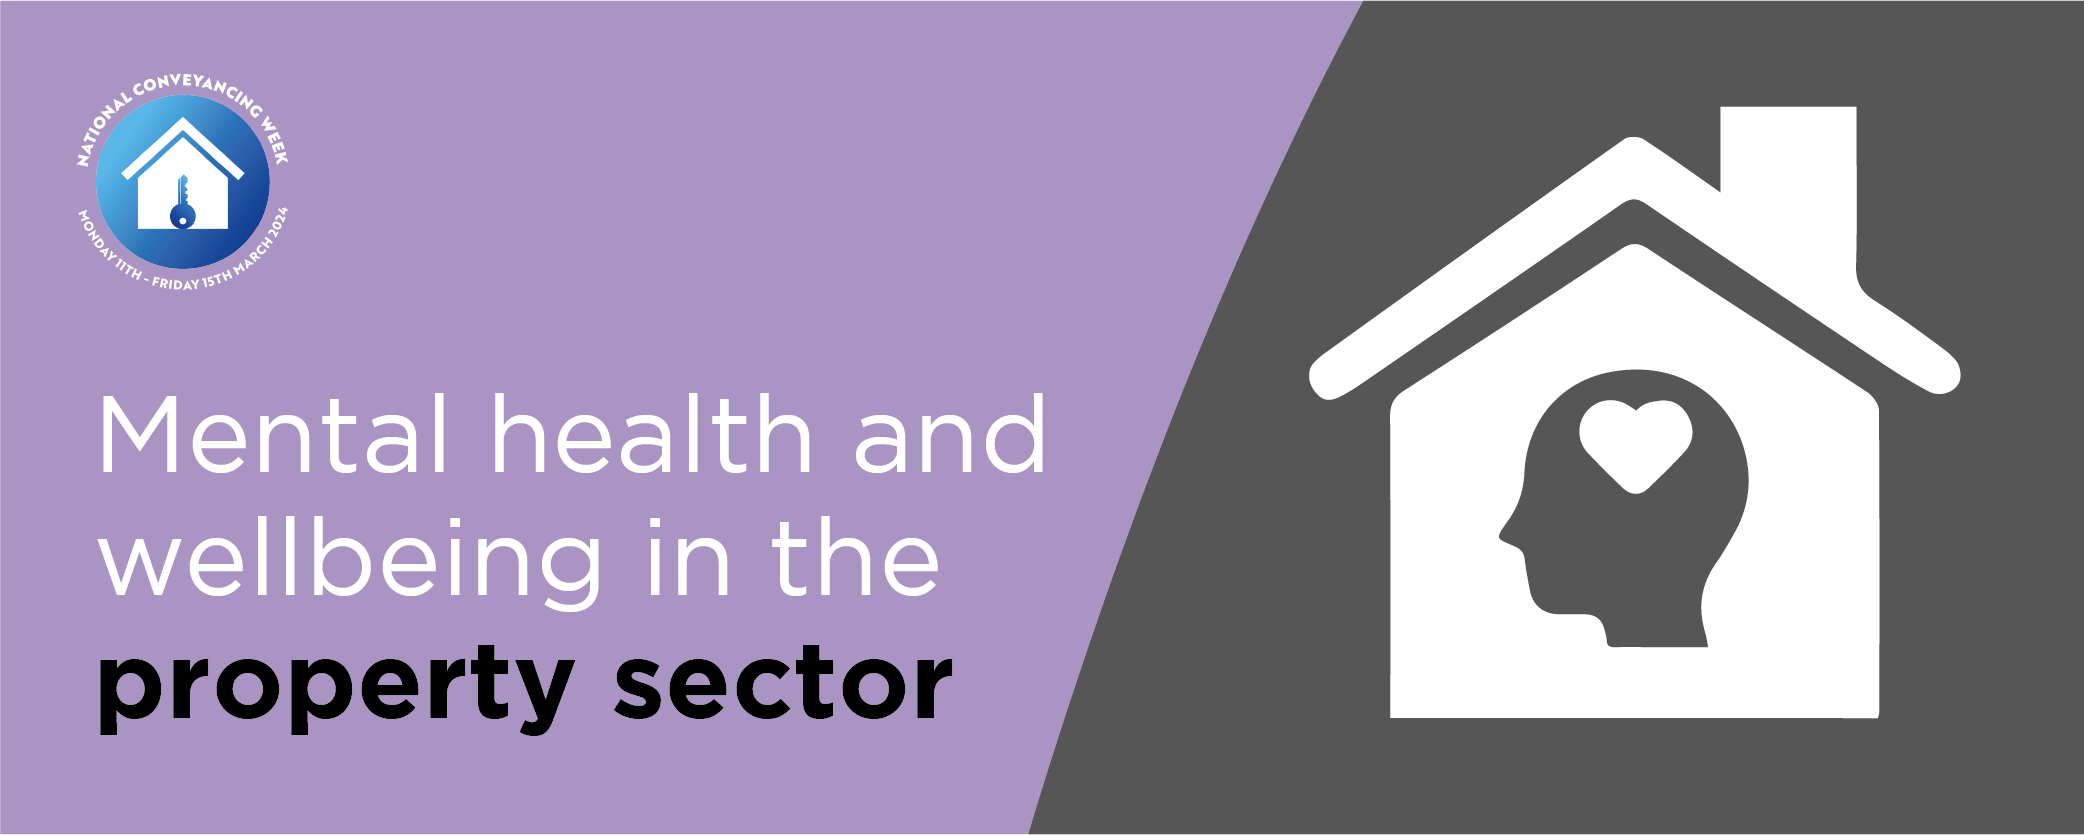 Mental health and wellbeing in the property sector